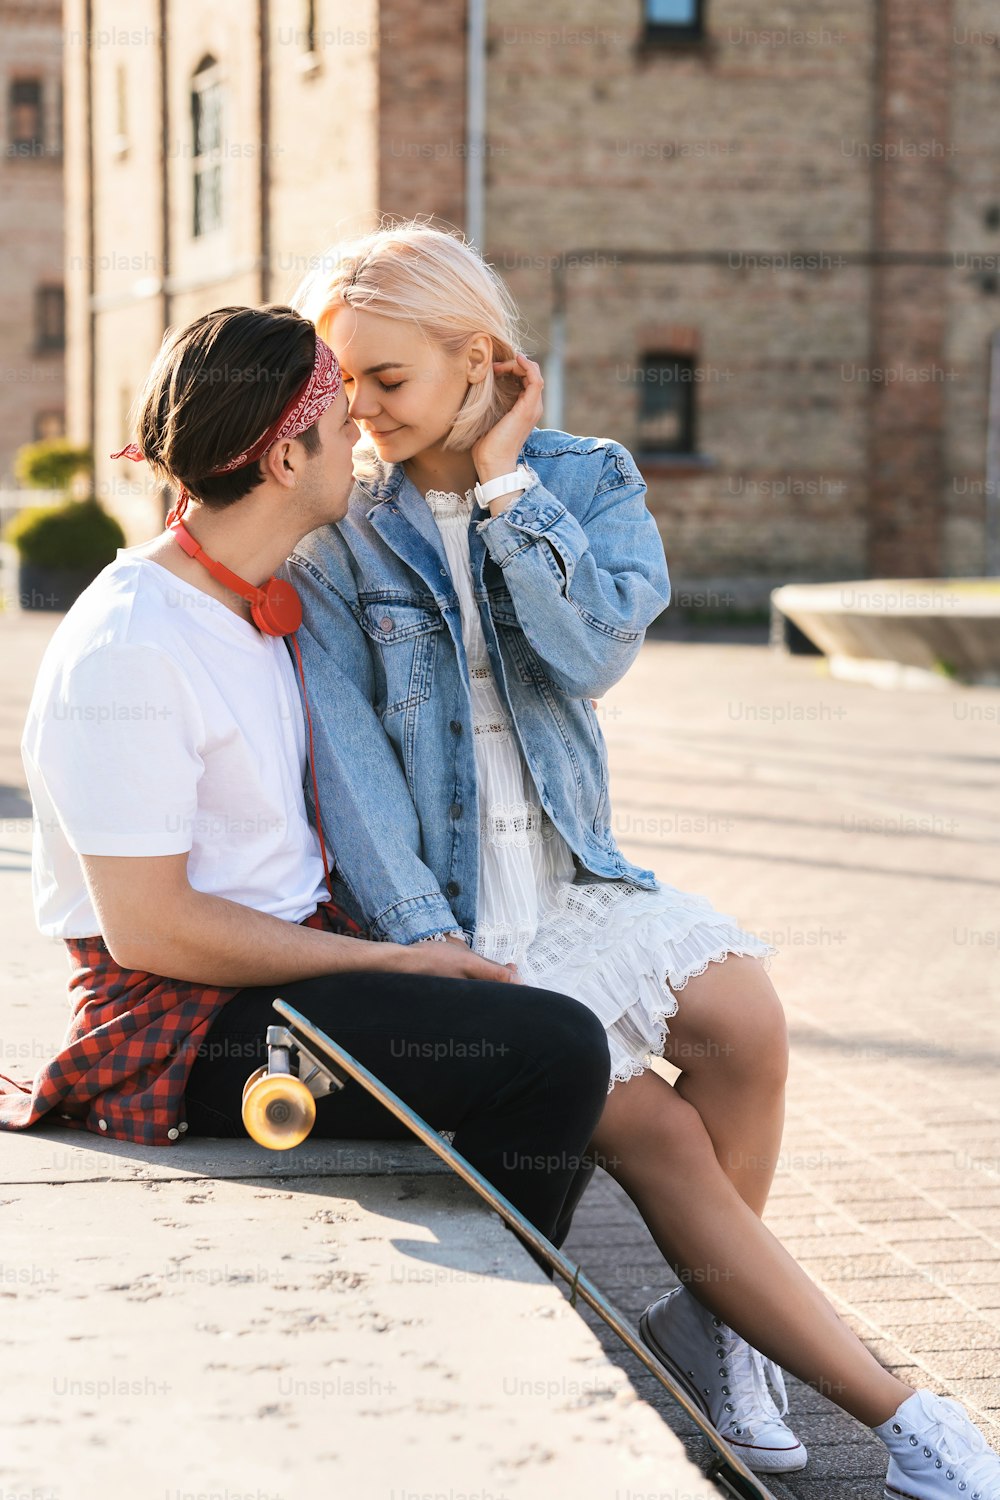 Stylish teenage couple with a longboard during their date in a city